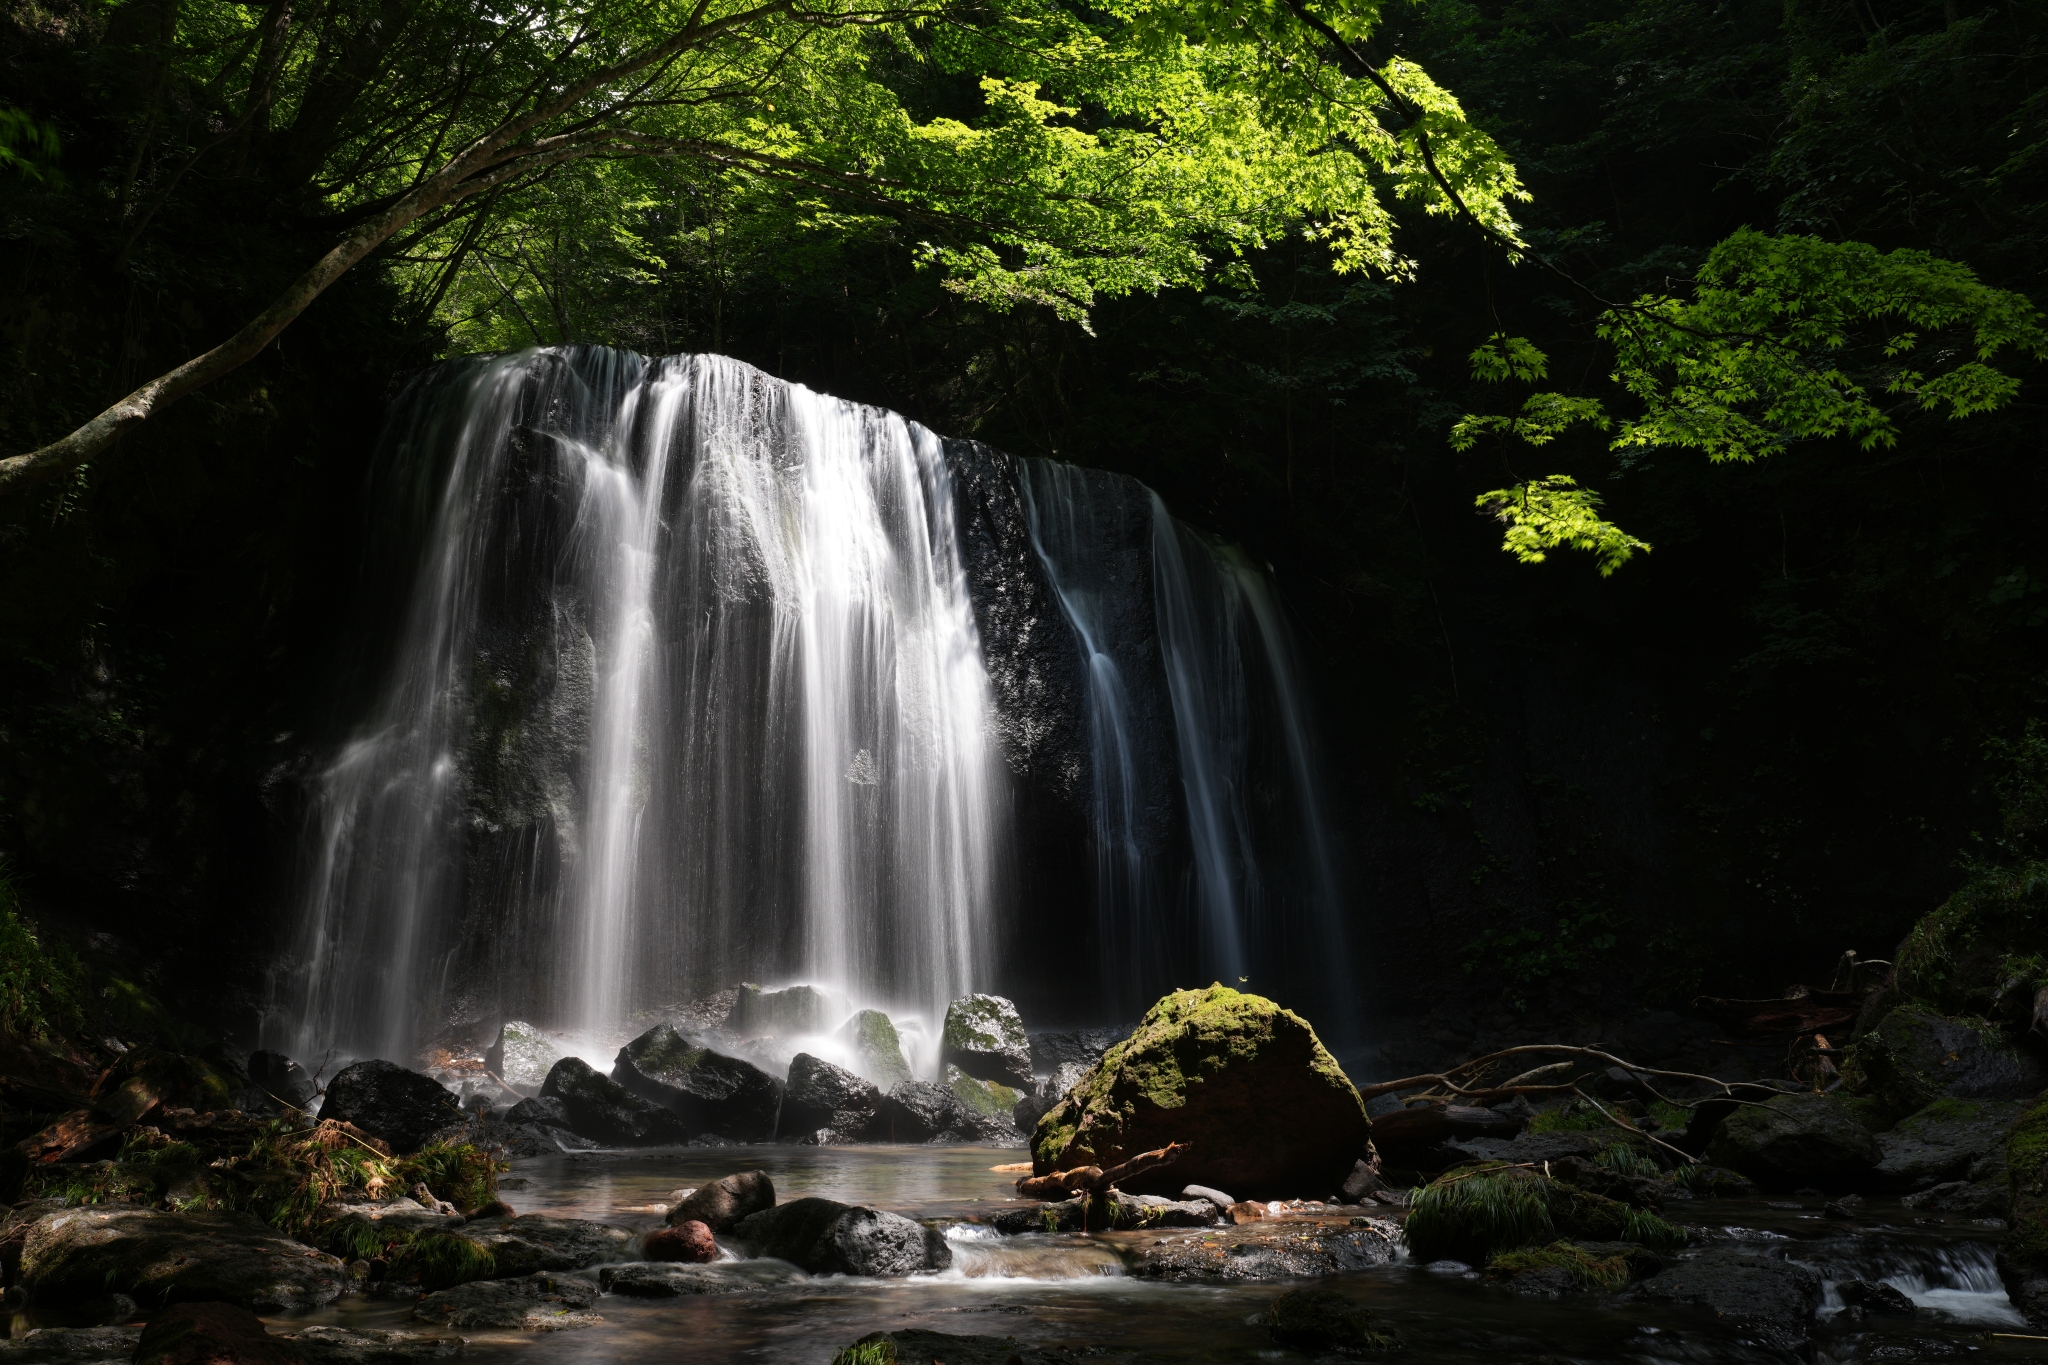 A waterfall in a deeply shaded forest